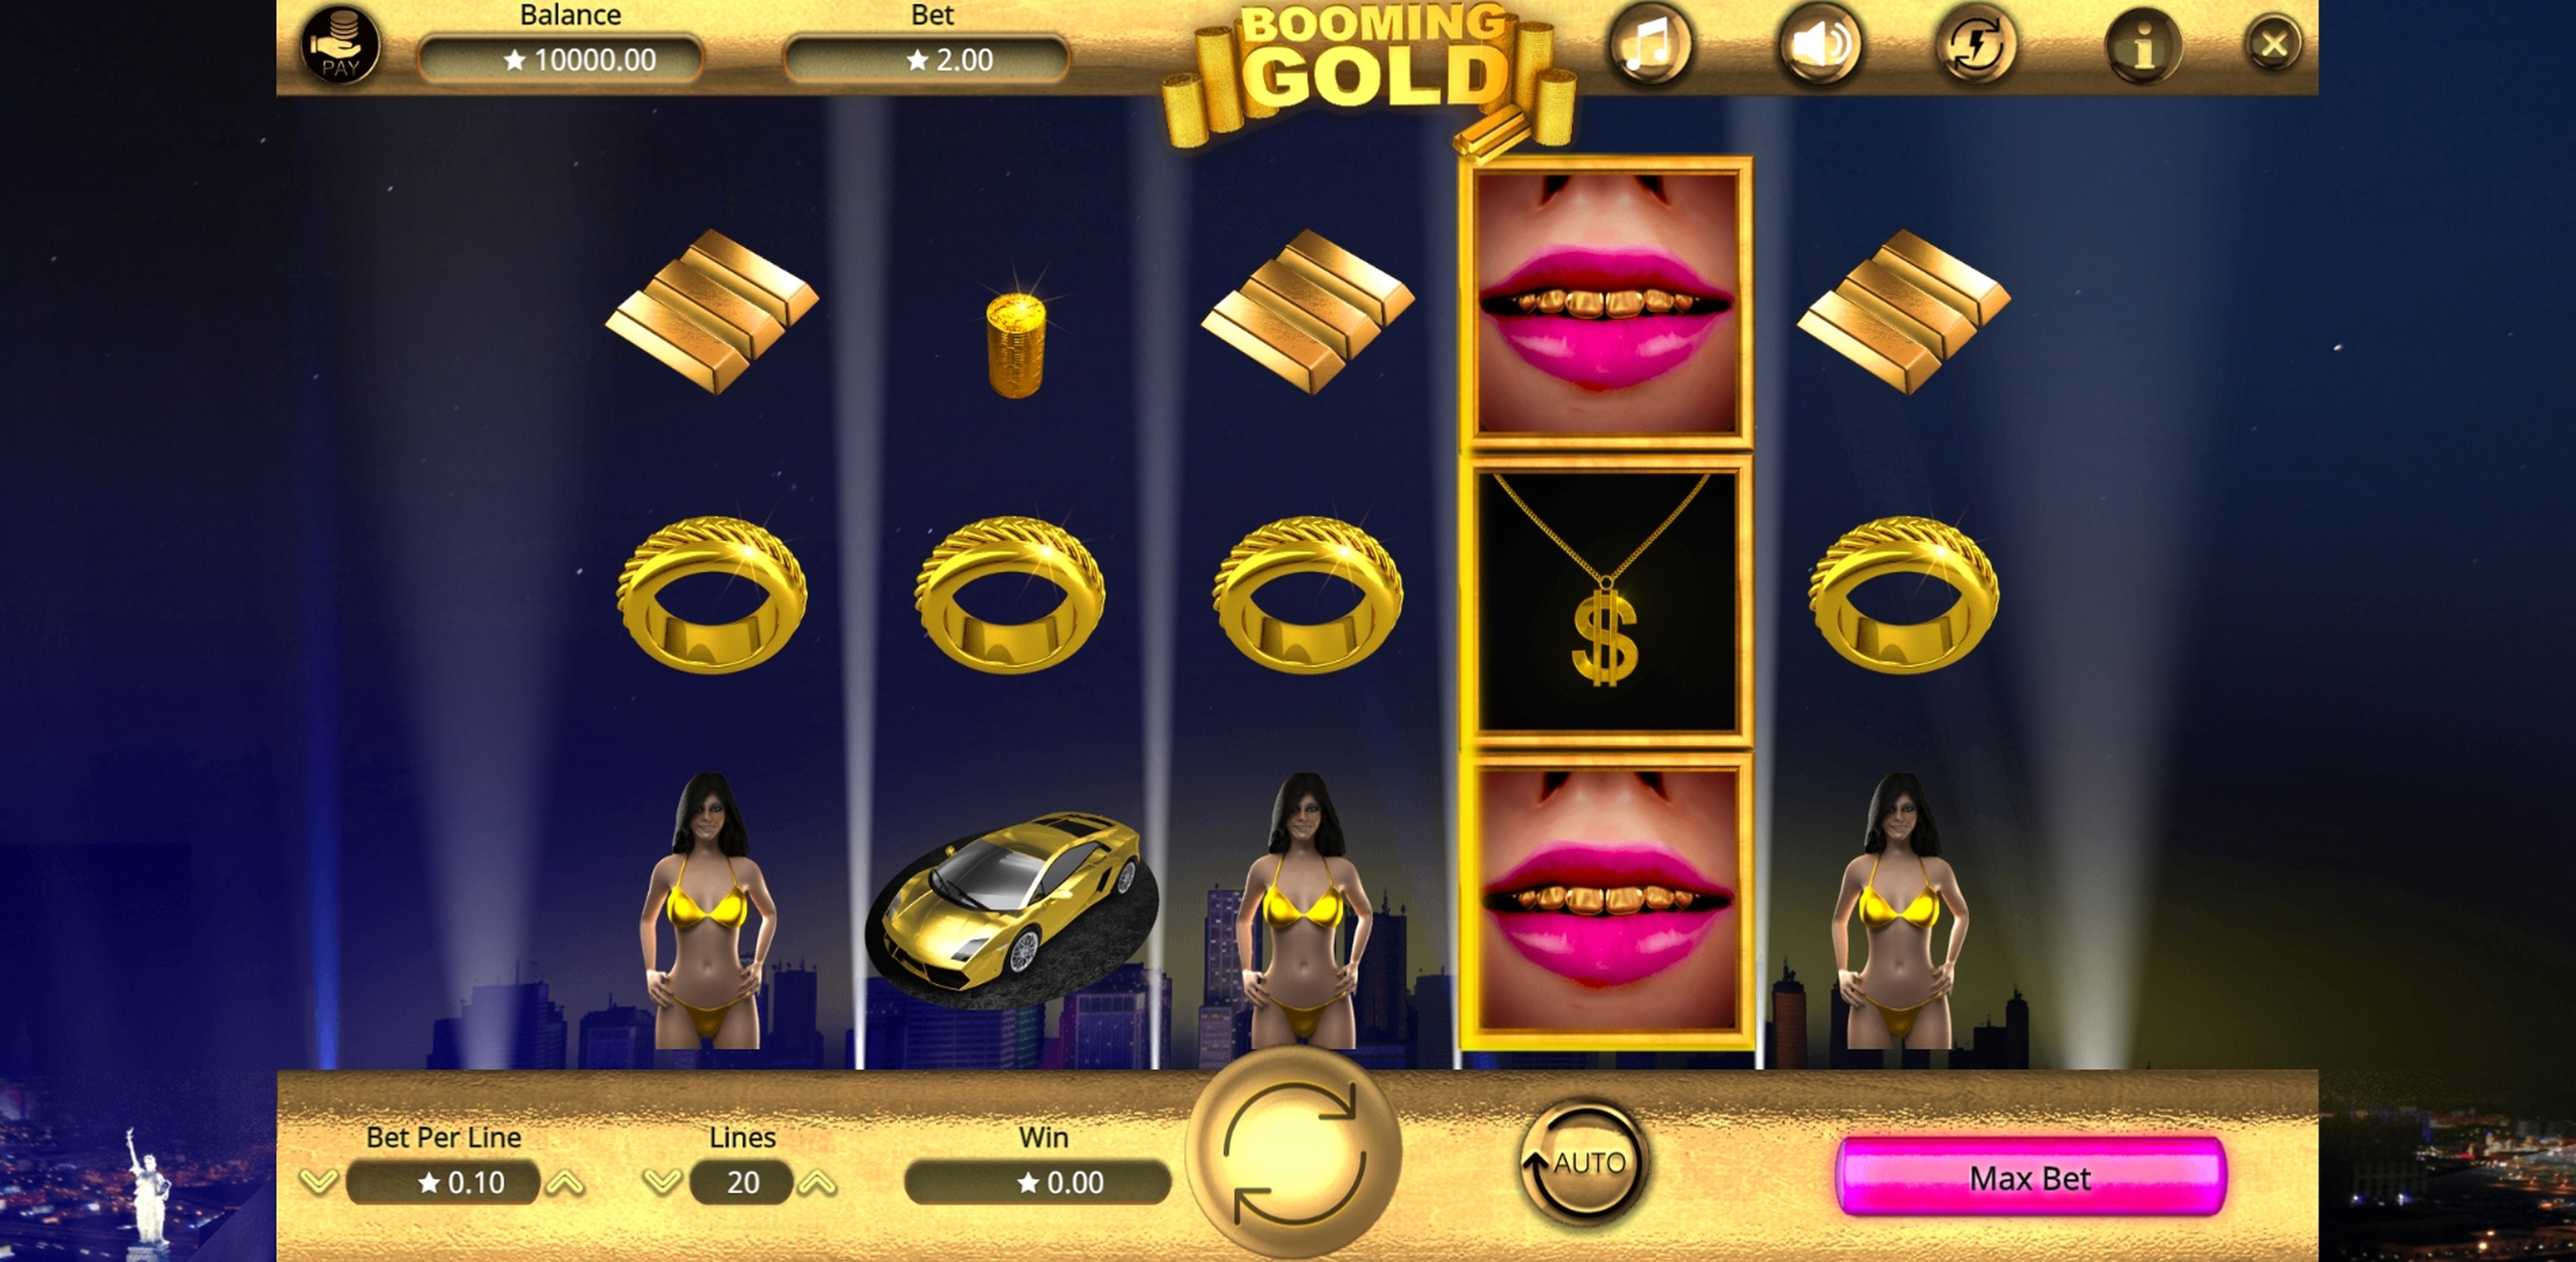 Reels in Booming Gold Slot Game by Booming Games